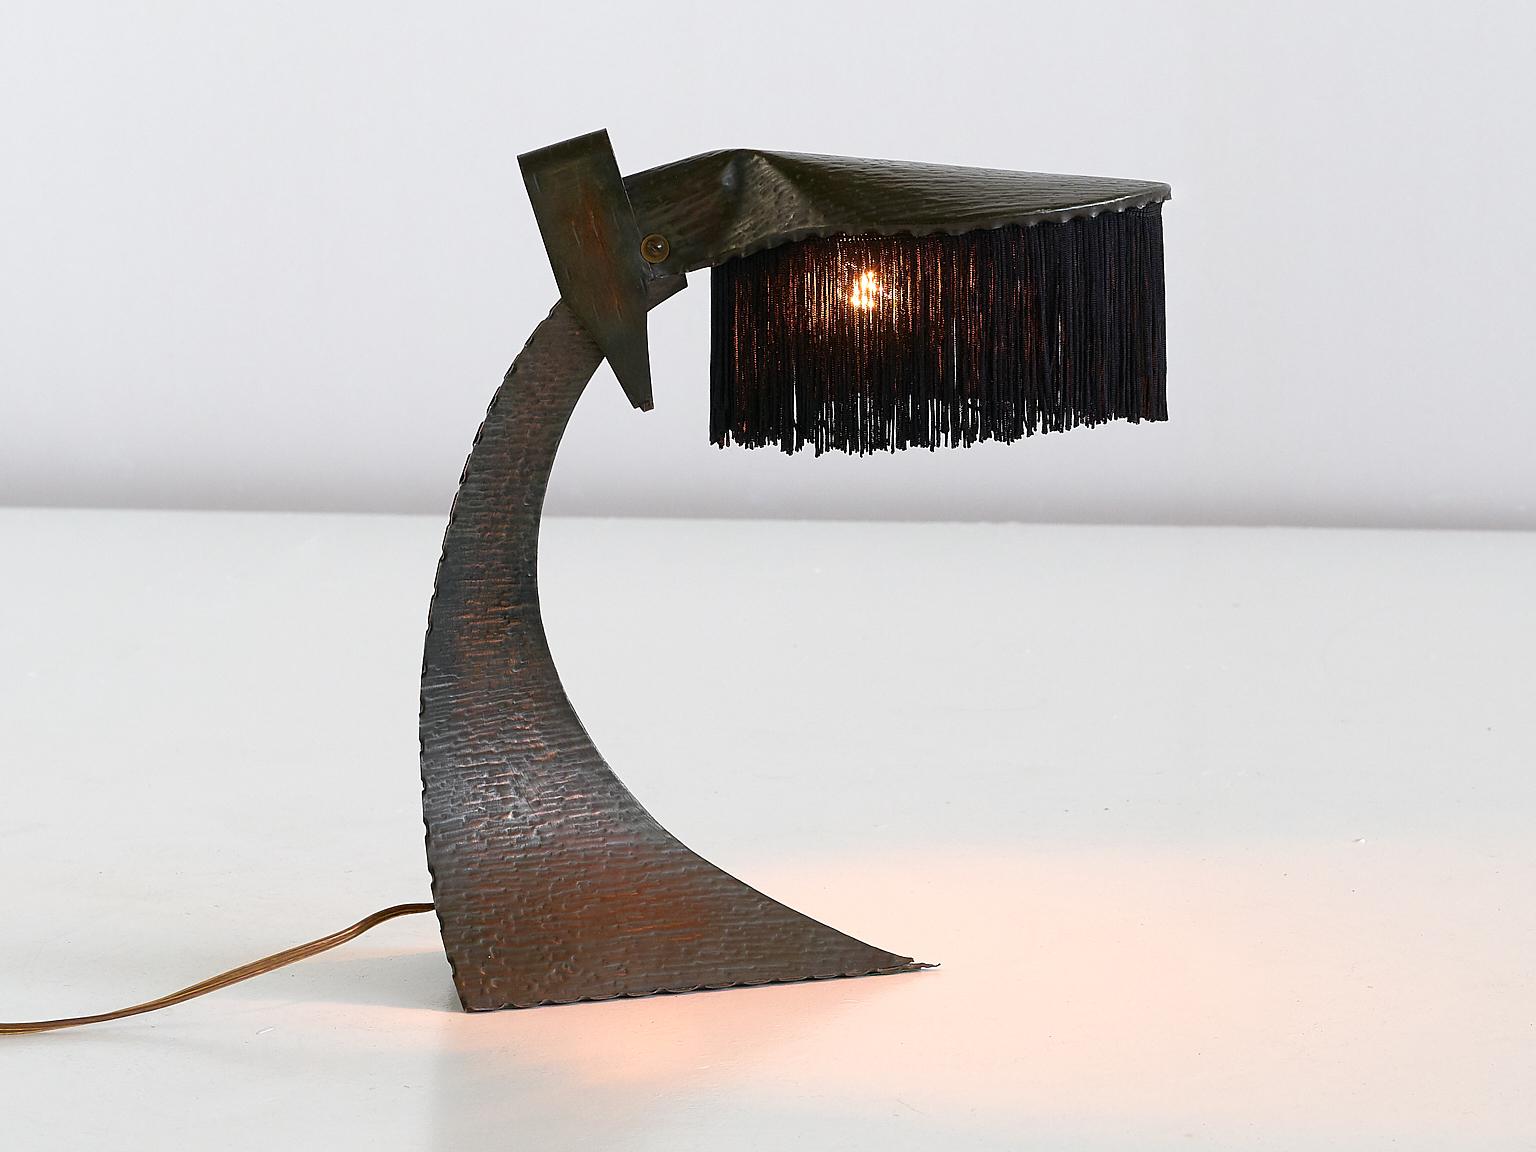 Early 20th Century Hendrik Methorst Table Lamp in Hammered Copper and Silk, Amsterdam School, 1925 For Sale